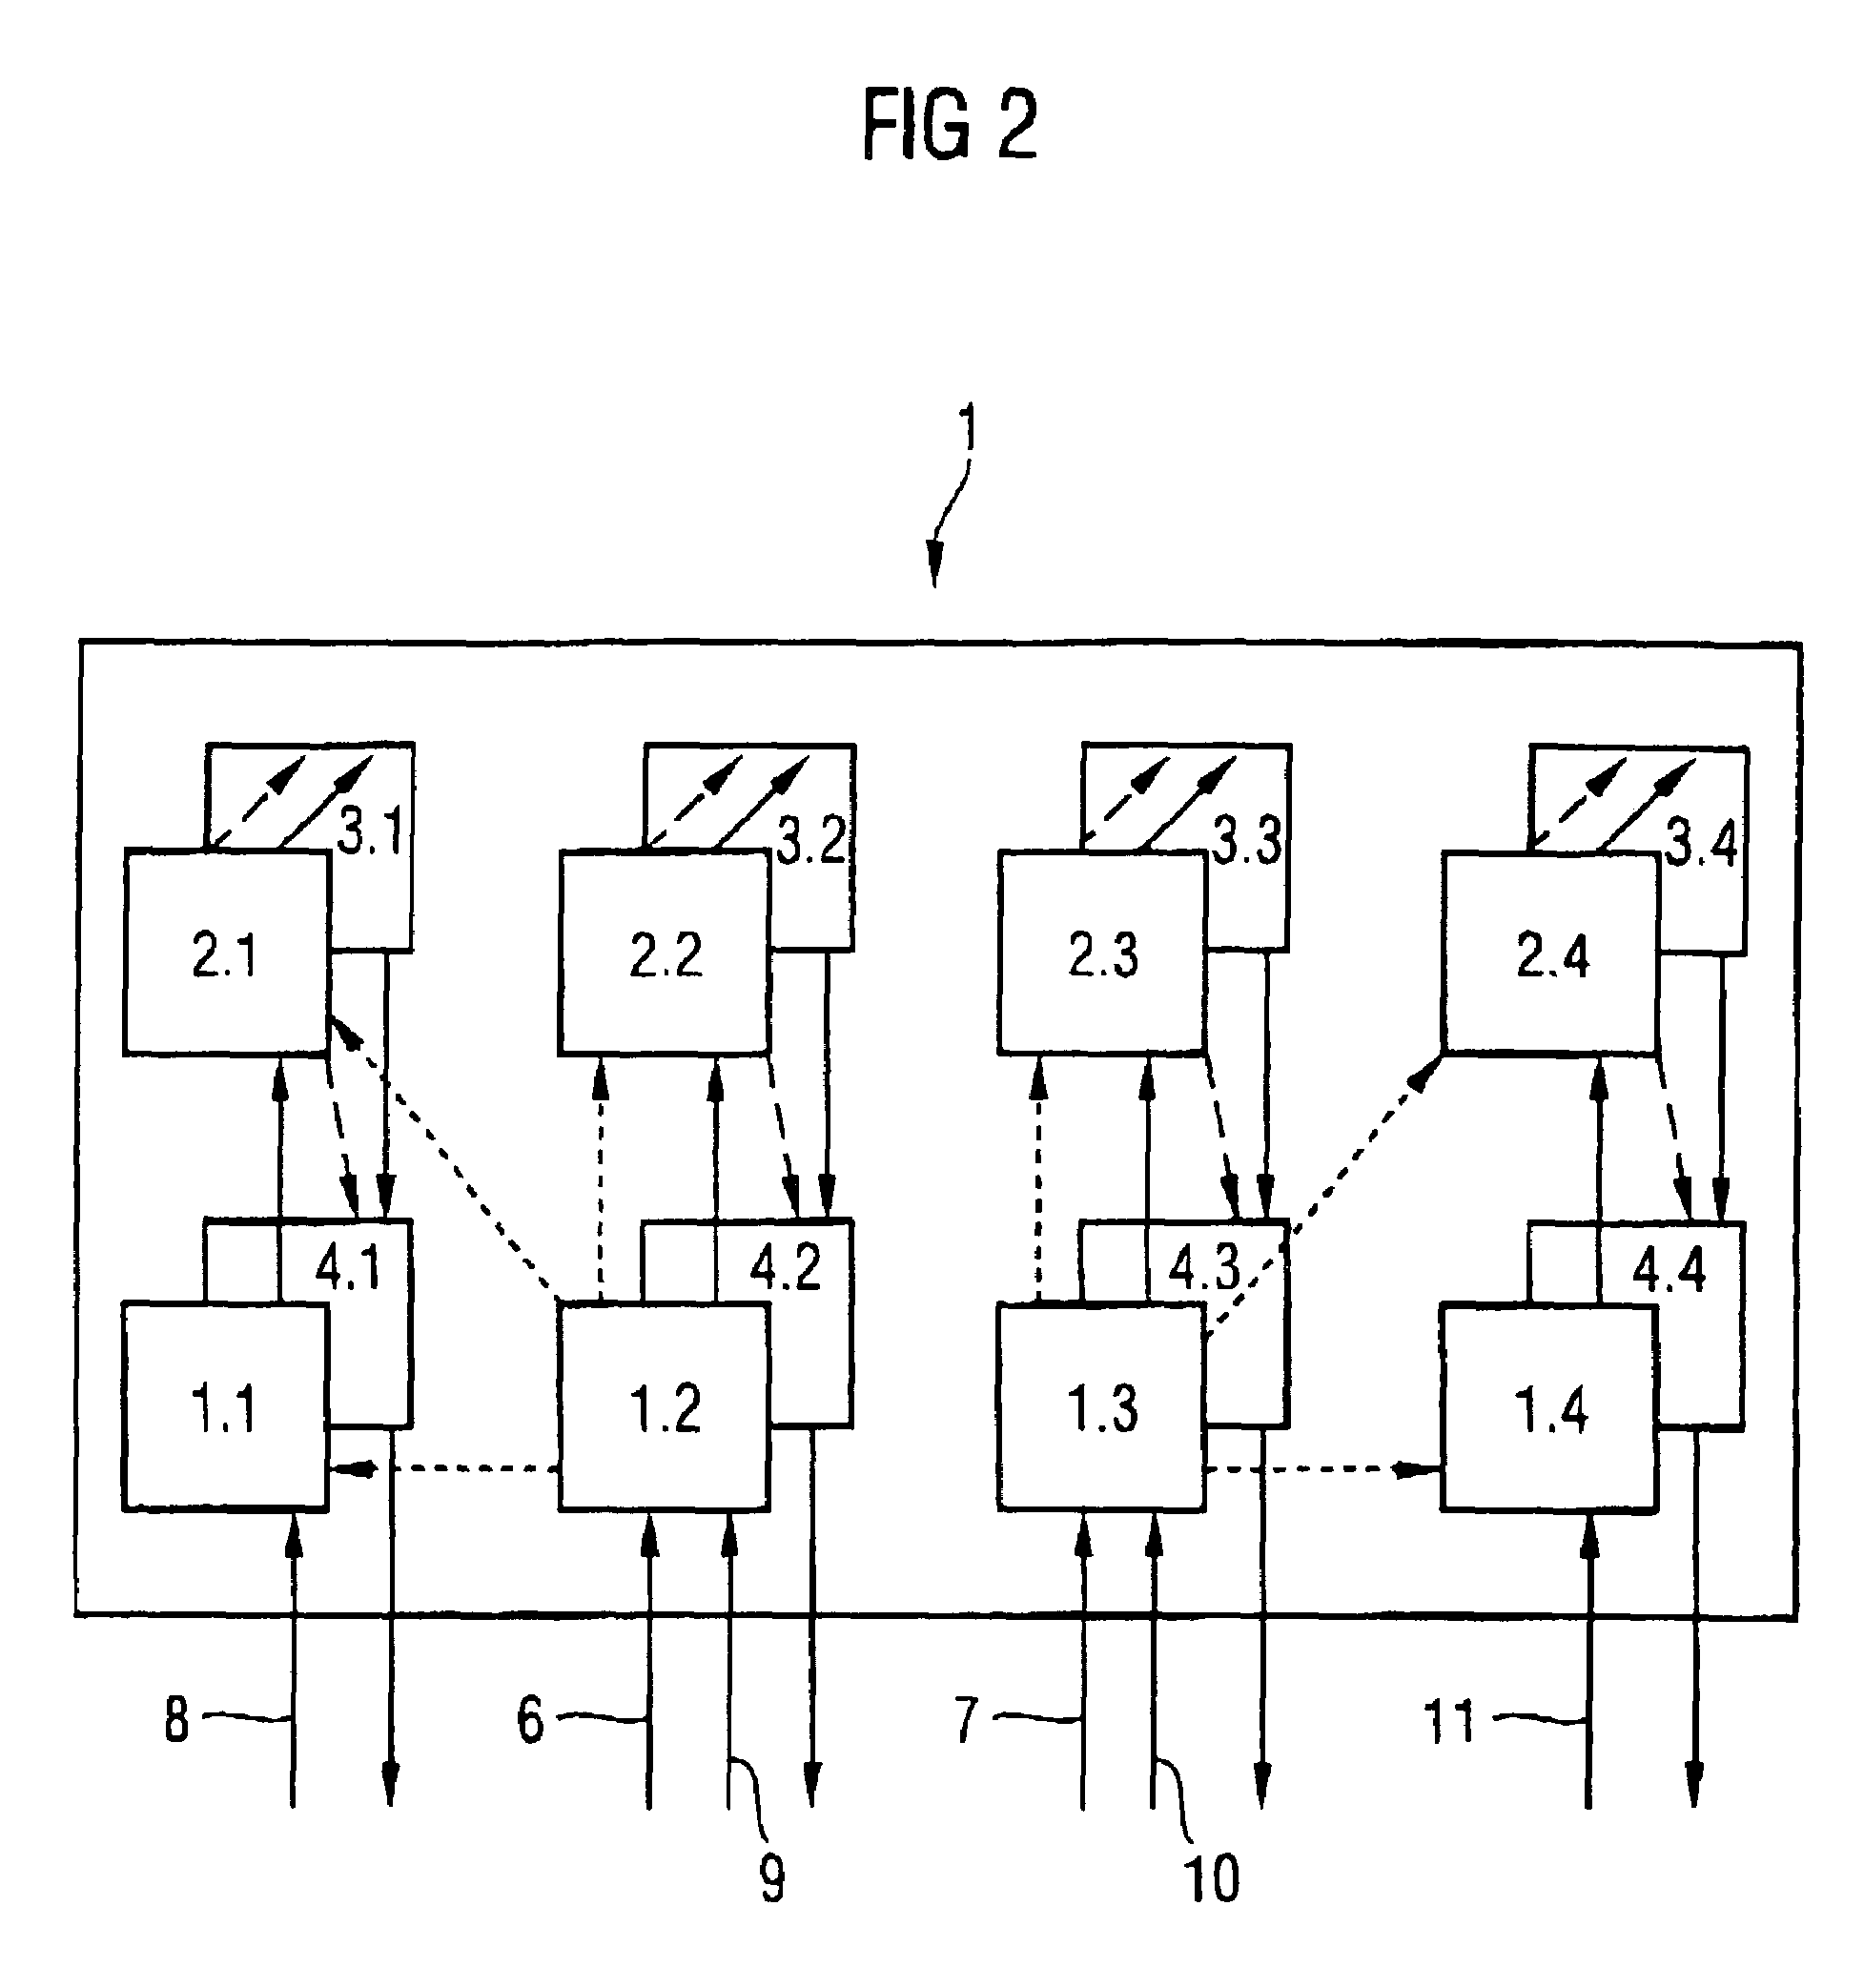 Semiconductor memory arrangement with branched control and address bus